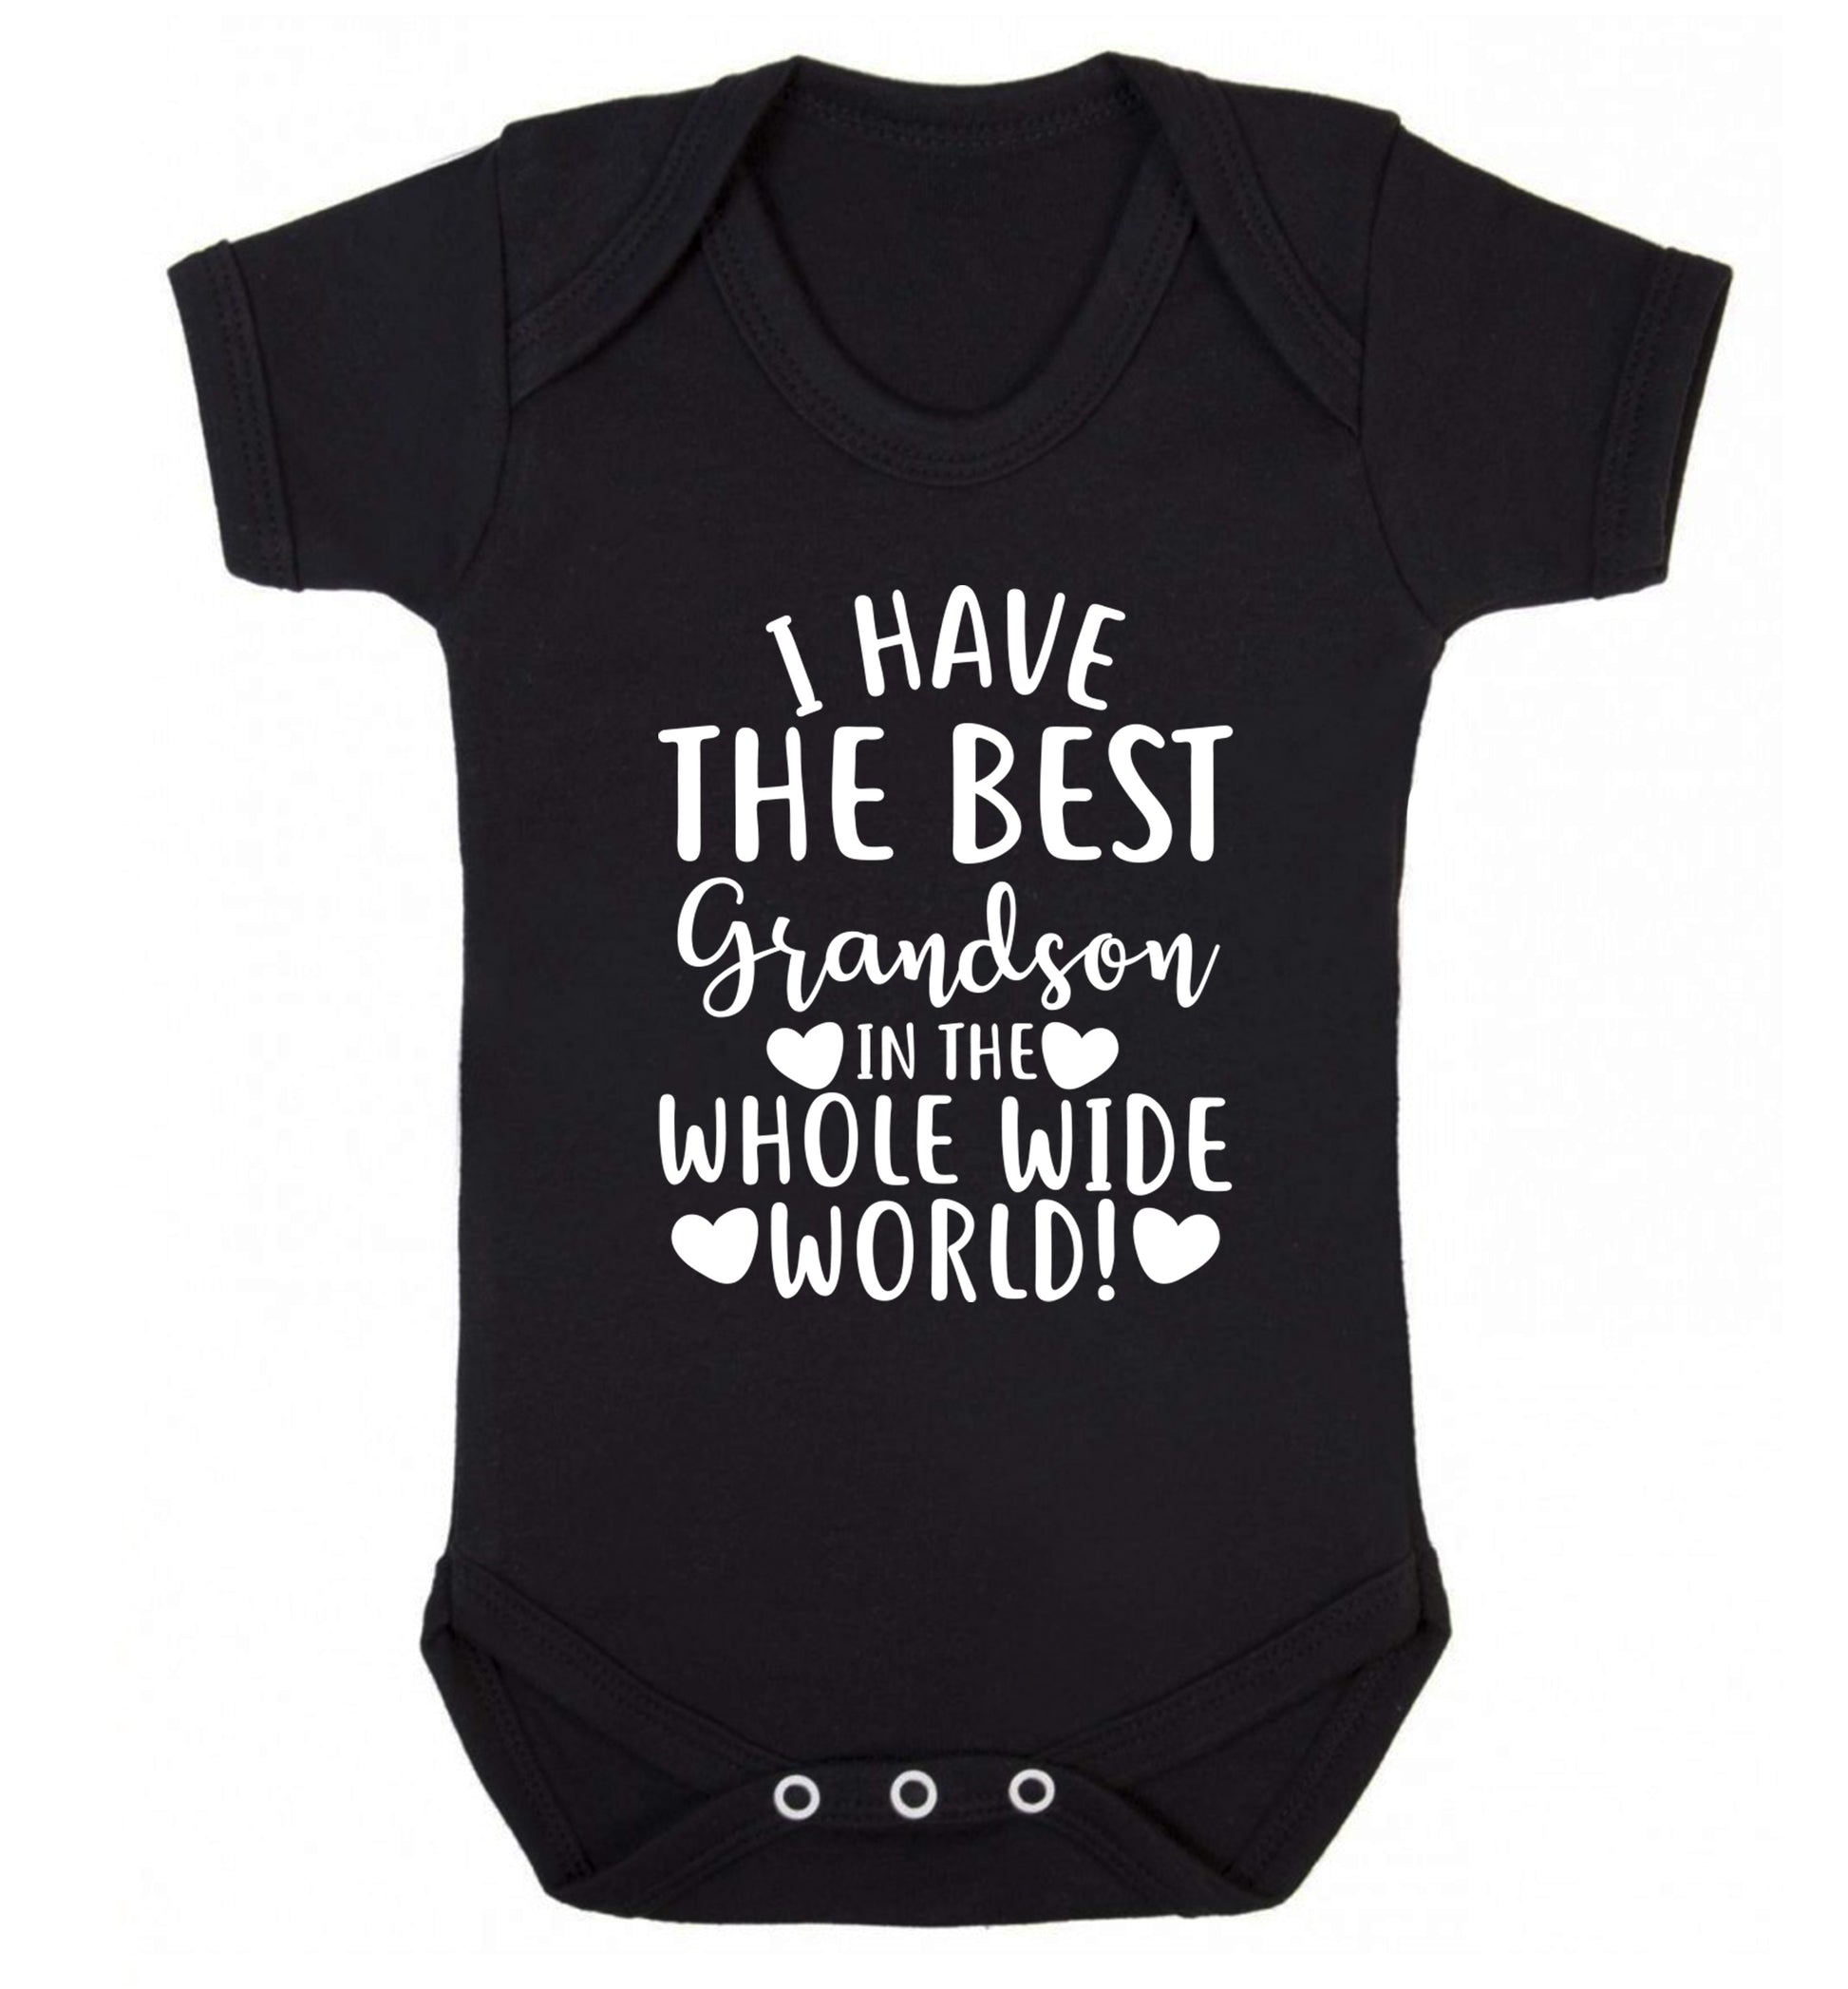 I have the best grandson in the whole wide world! Baby Vest black 18-24 months